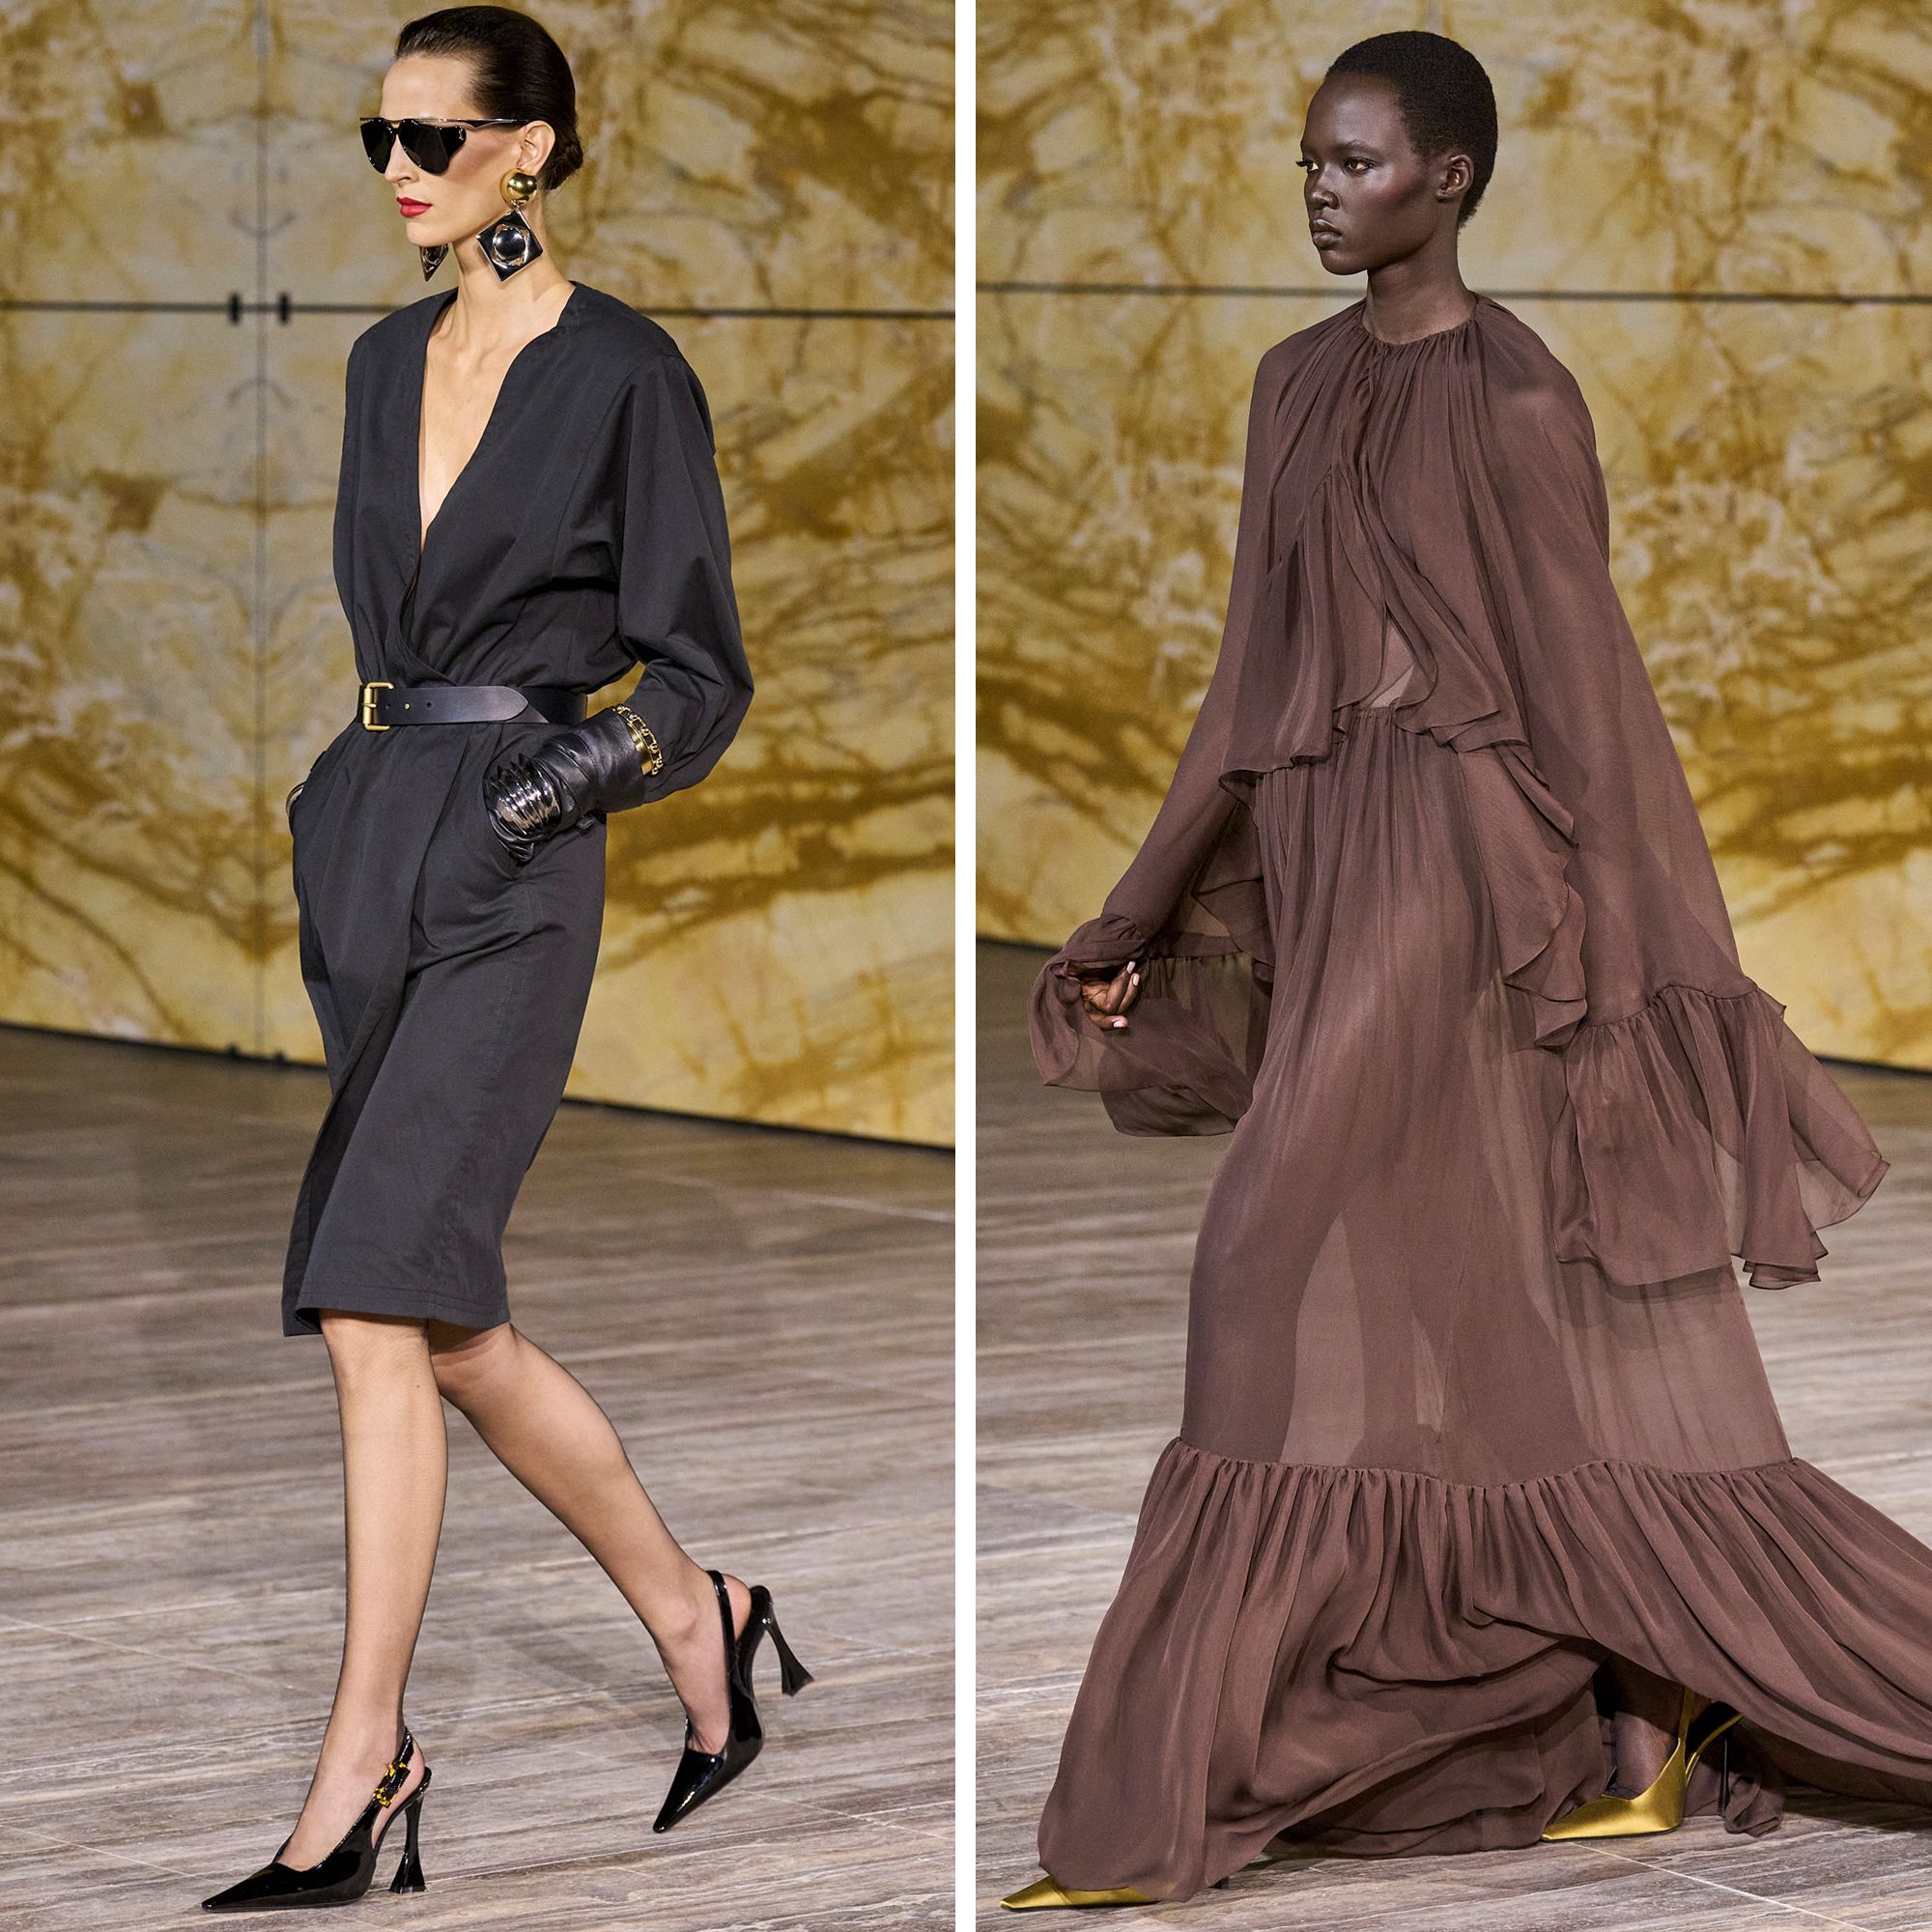 Paris Fashion Week 2023: best moments from the final shows – Dior and Saint  Laurent bring back the pencil skirt, Balenciaga goes 'humble-core', and  Zendaya graces Schiaparelli's first RTW catwalk